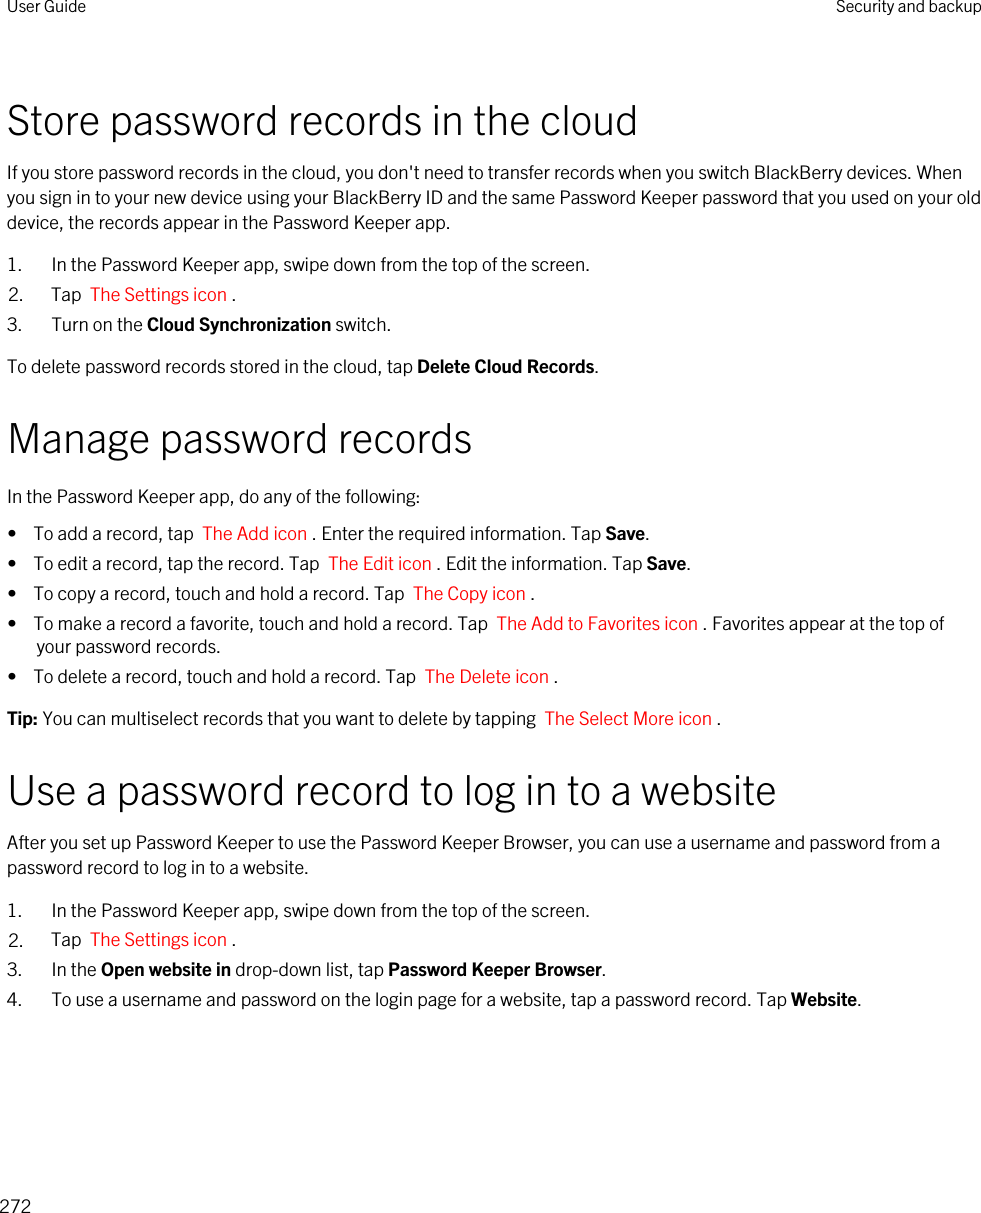 Store password records in the cloudIf you store password records in the cloud, you don&apos;t need to transfer records when you switch BlackBerry devices. When you sign in to your new device using your BlackBerry ID and the same Password Keeper password that you used on your old device, the records appear in the Password Keeper app.1. In the Password Keeper app, swipe down from the top of the screen.2. Tap  The Settings icon .3. Turn on the Cloud Synchronization switch.To delete password records stored in the cloud, tap Delete Cloud Records.Manage password recordsIn the Password Keeper app, do any of the following:•  To add a record, tap  The Add icon . Enter the required information. Tap Save.•  To edit a record, tap the record. Tap  The Edit icon . Edit the information. Tap Save.•  To copy a record, touch and hold a record. Tap  The Copy icon .•  To make a record a favorite, touch and hold a record. Tap  The Add to Favorites icon . Favorites appear at the top of your password records.•  To delete a record, touch and hold a record. Tap  The Delete icon .Tip: You can multiselect records that you want to delete by tapping  The Select More icon .Use a password record to log in to a websiteAfter you set up Password Keeper to use the Password Keeper Browser, you can use a username and password from a password record to log in to a website.1. In the Password Keeper app, swipe down from the top of the screen.2. Tap  The Settings icon . 3. In the Open website in drop-down list, tap Password Keeper Browser.4. To use a username and password on the login page for a website, tap a password record. Tap Website.User Guide Security and backup272